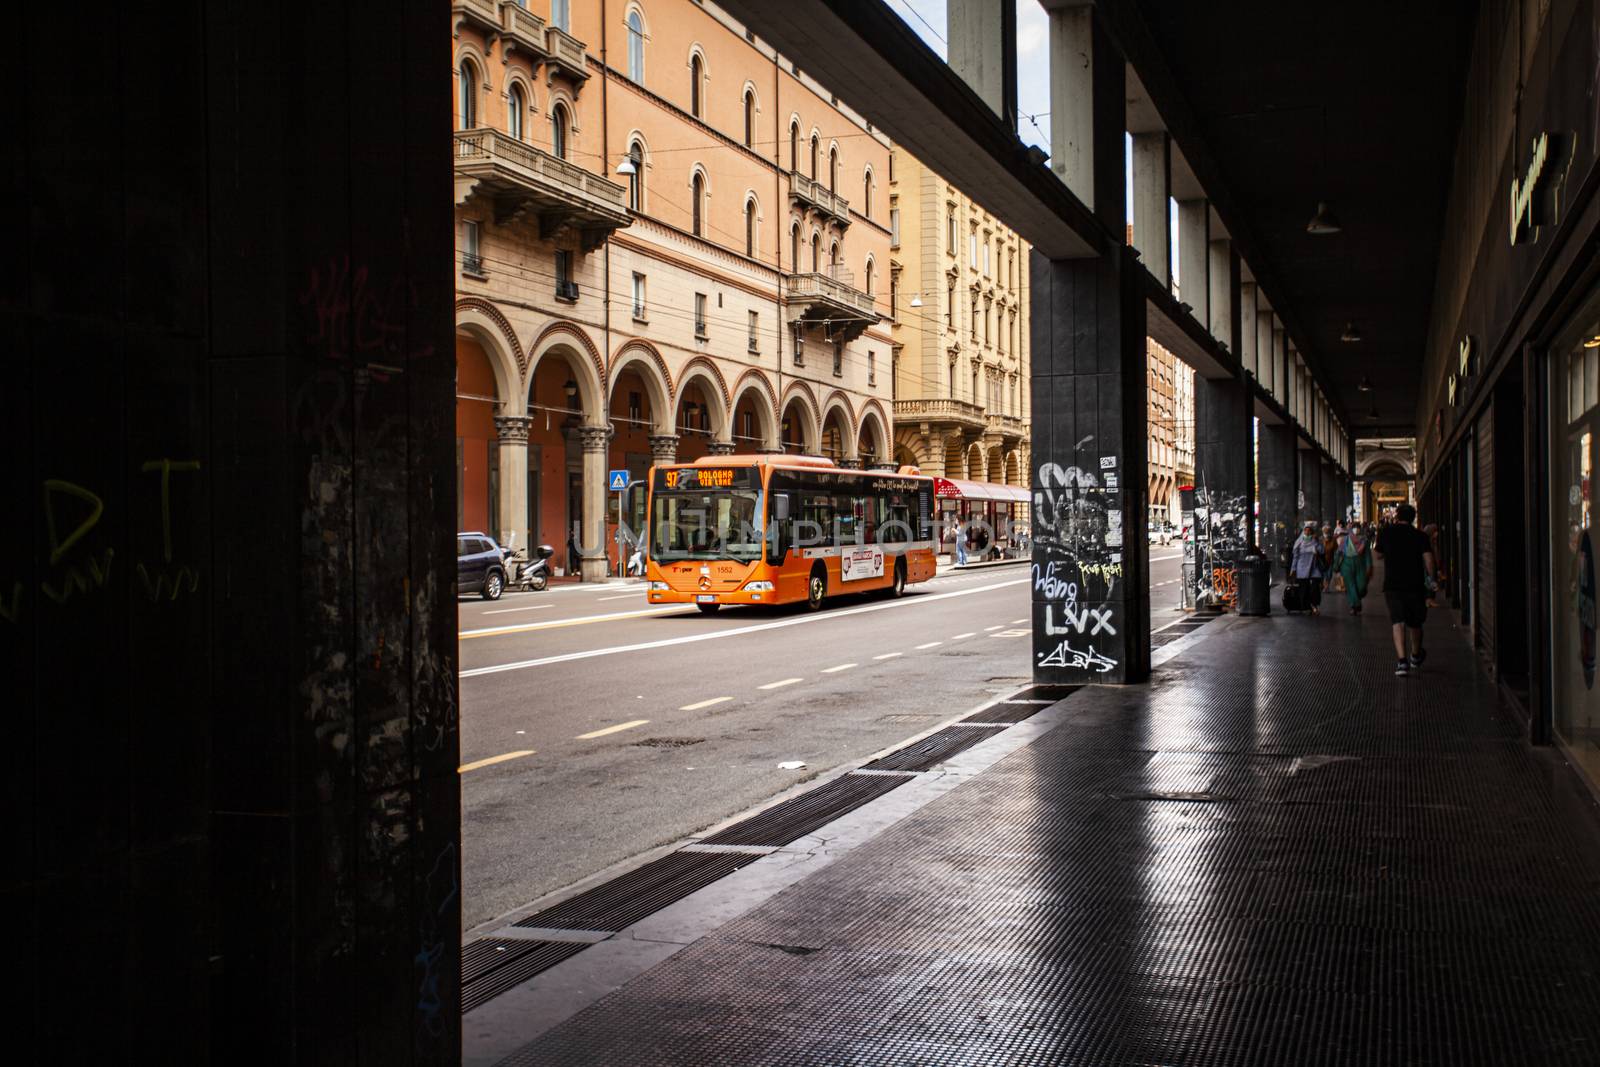 Bus on the streets of Bologna, Italy by pippocarlot